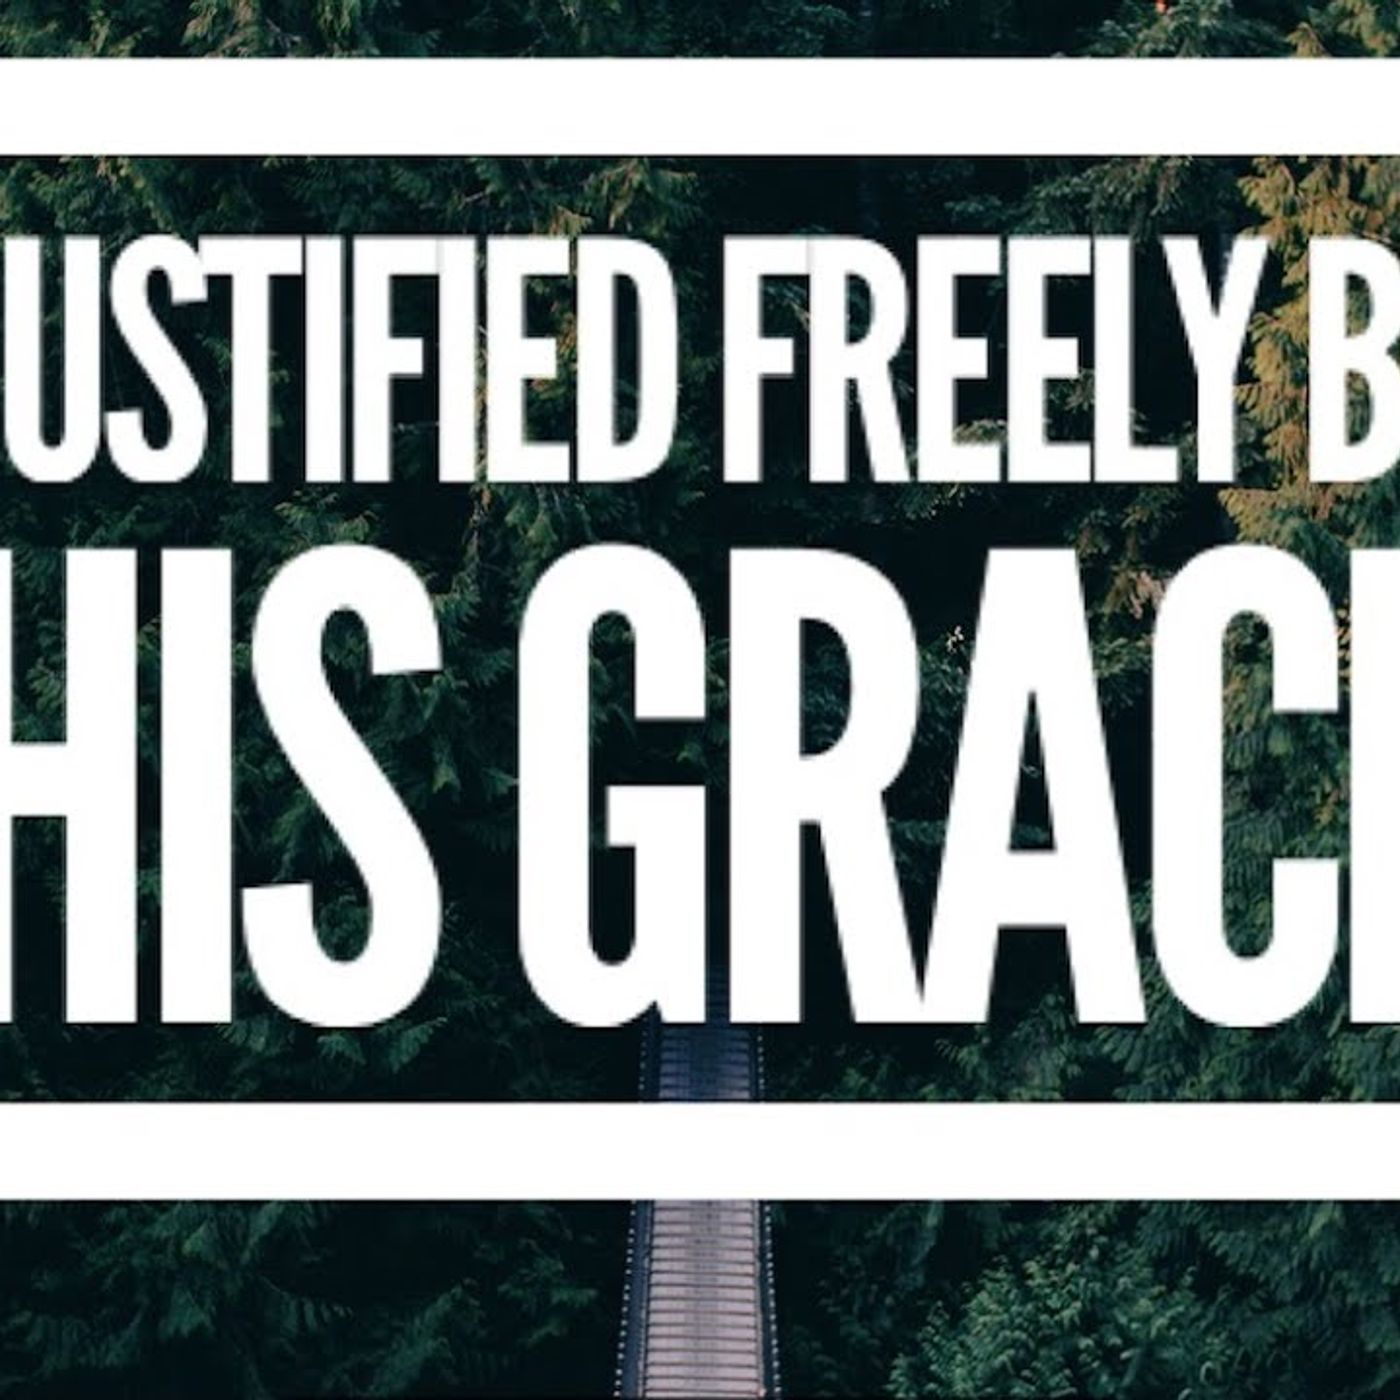 Justfied freely by His Grace - Romans 3